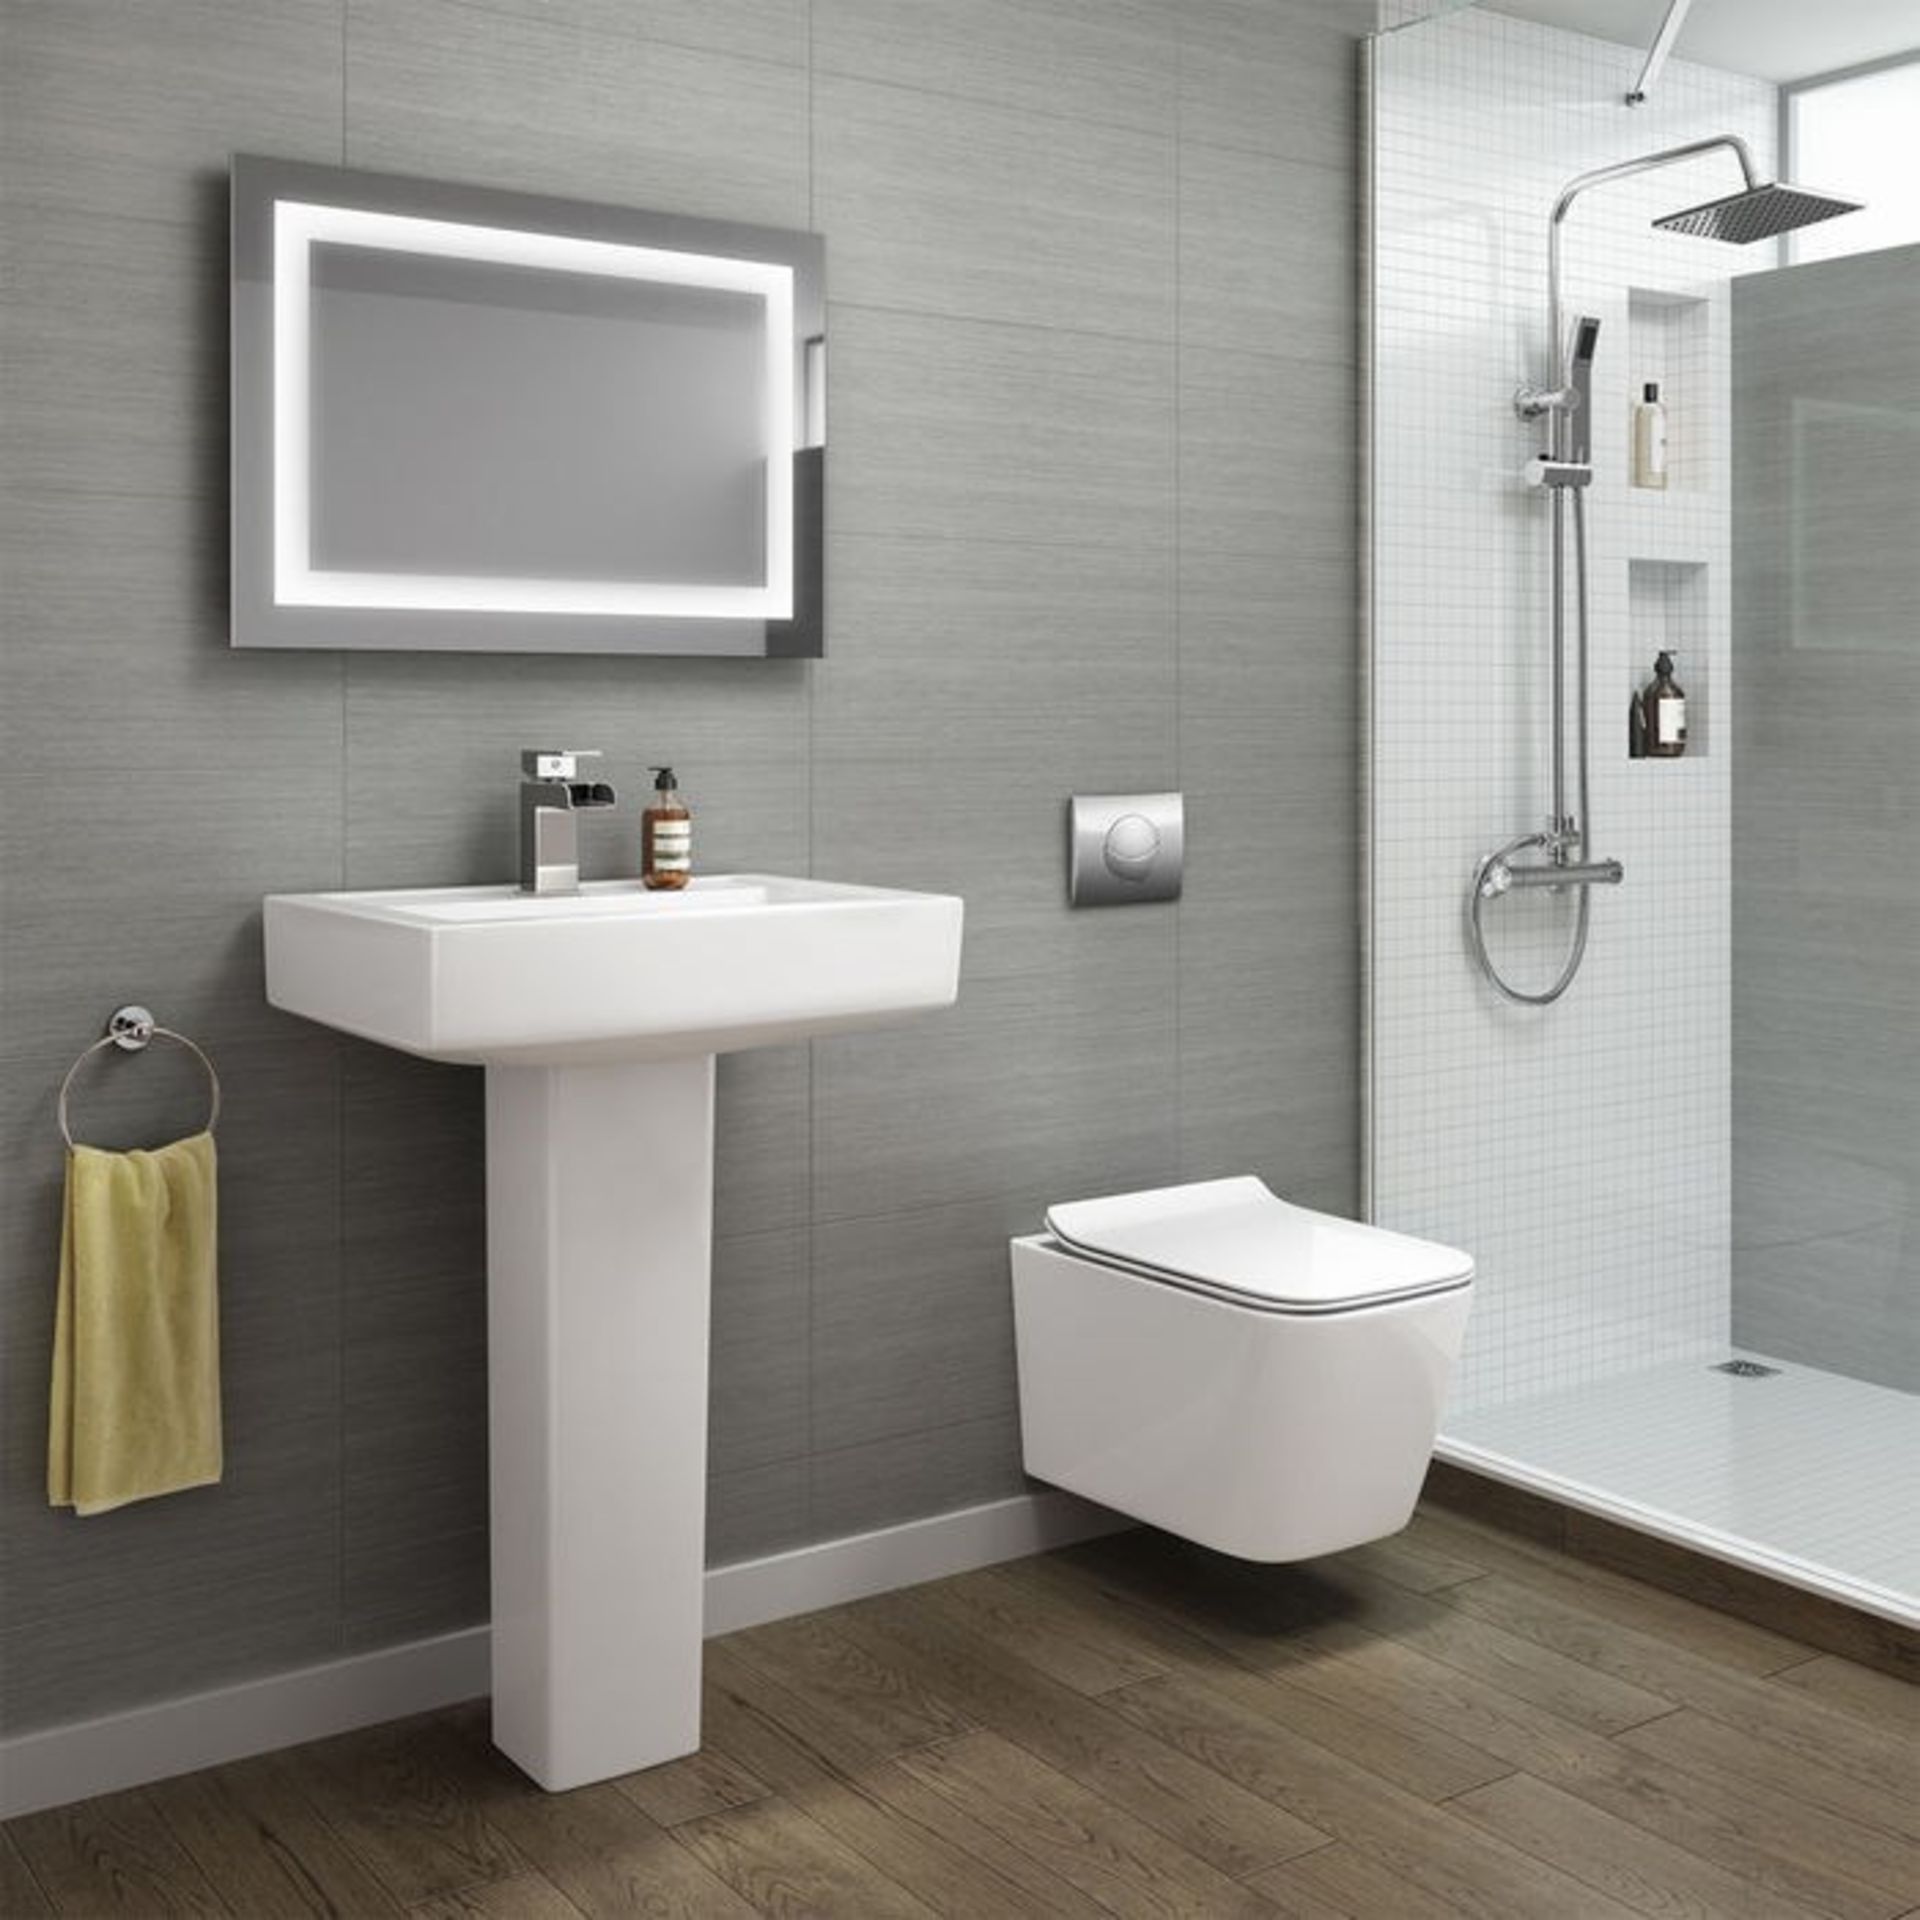 BRAND NEW BOXED Florence Wall Hung Toilet inc Luxury Soft Close Seat. RRP £349.99.Made from W... - Image 2 of 3